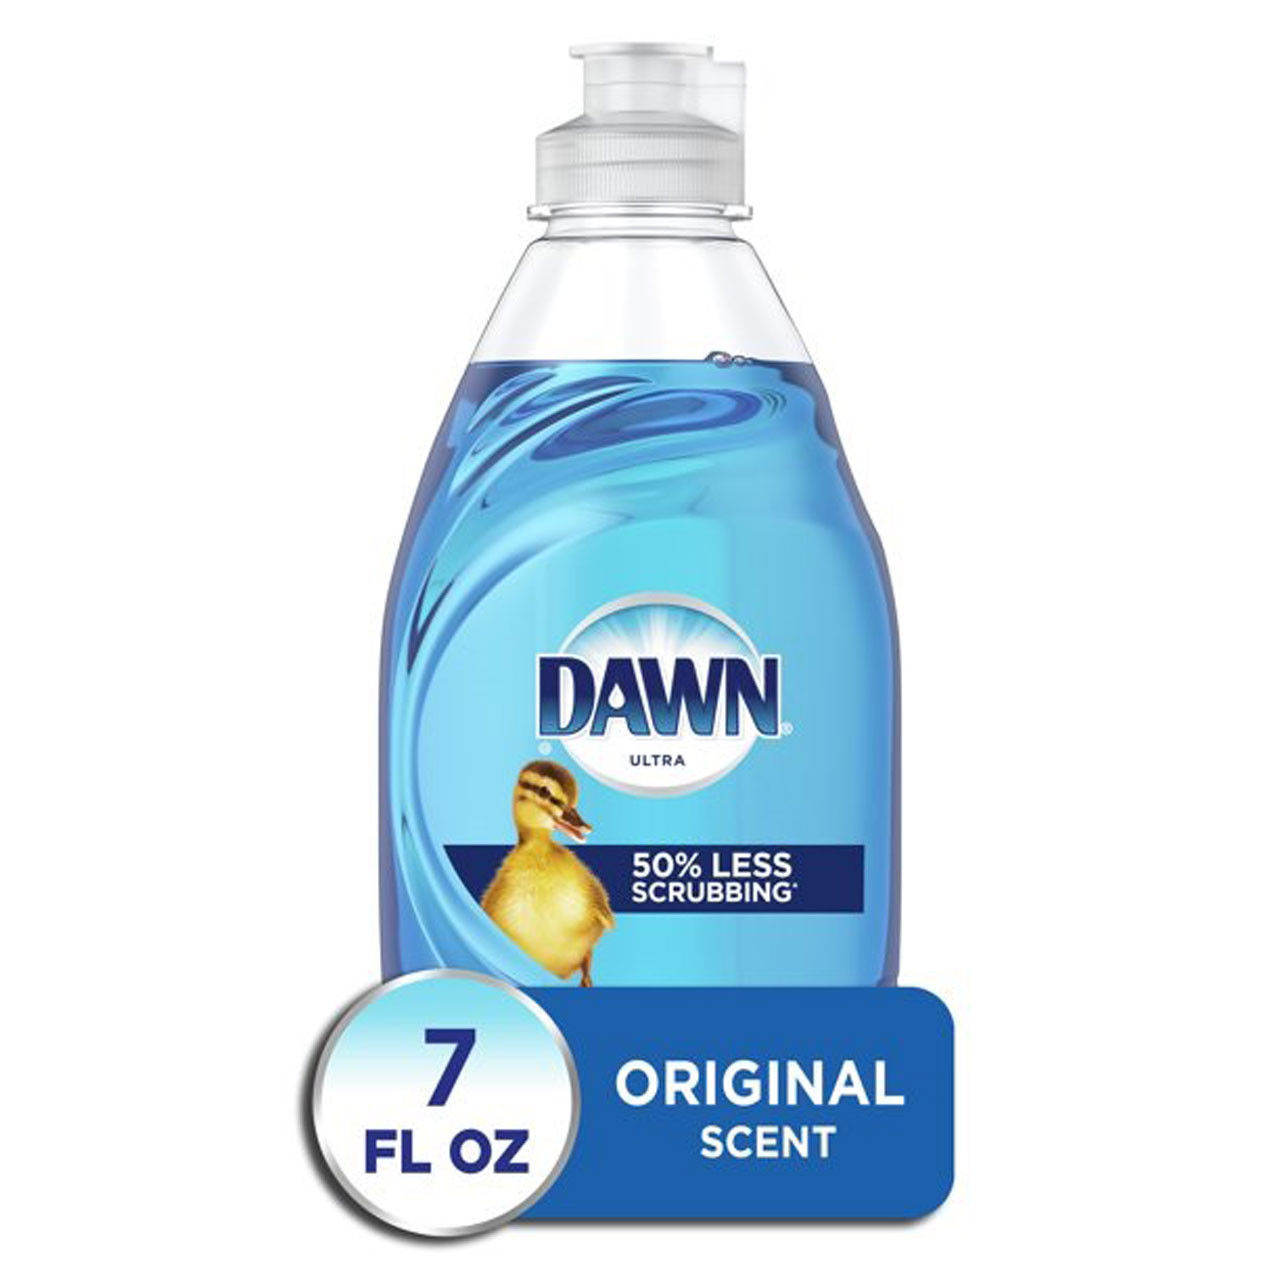 To what locations does the company ship its Dawn dish soap wholesale?